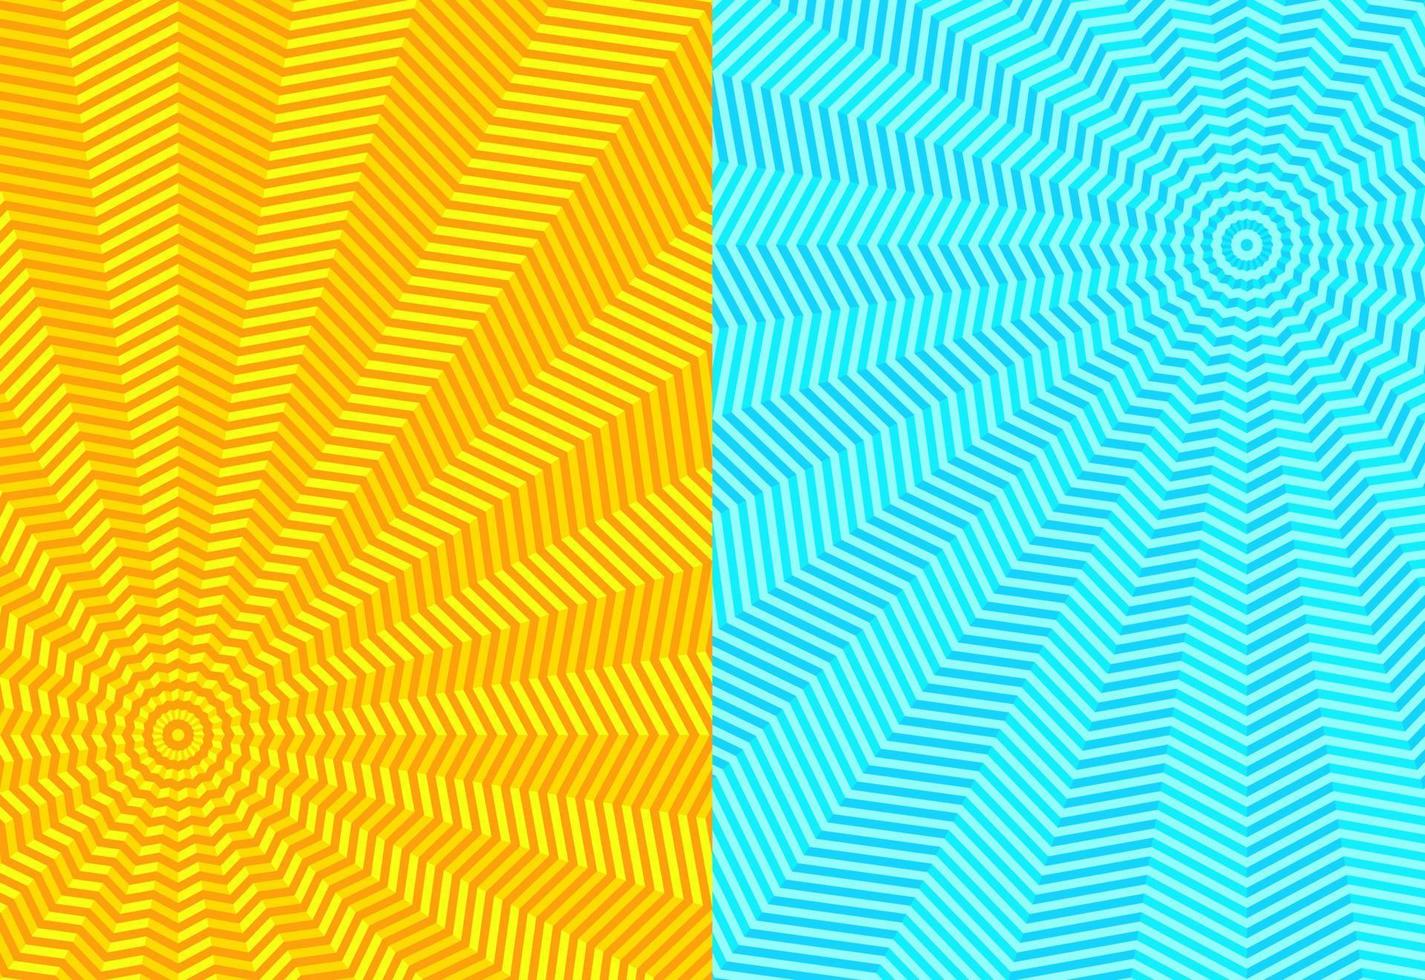 M13 - Illusion Blue Yellow Abstract Background vector